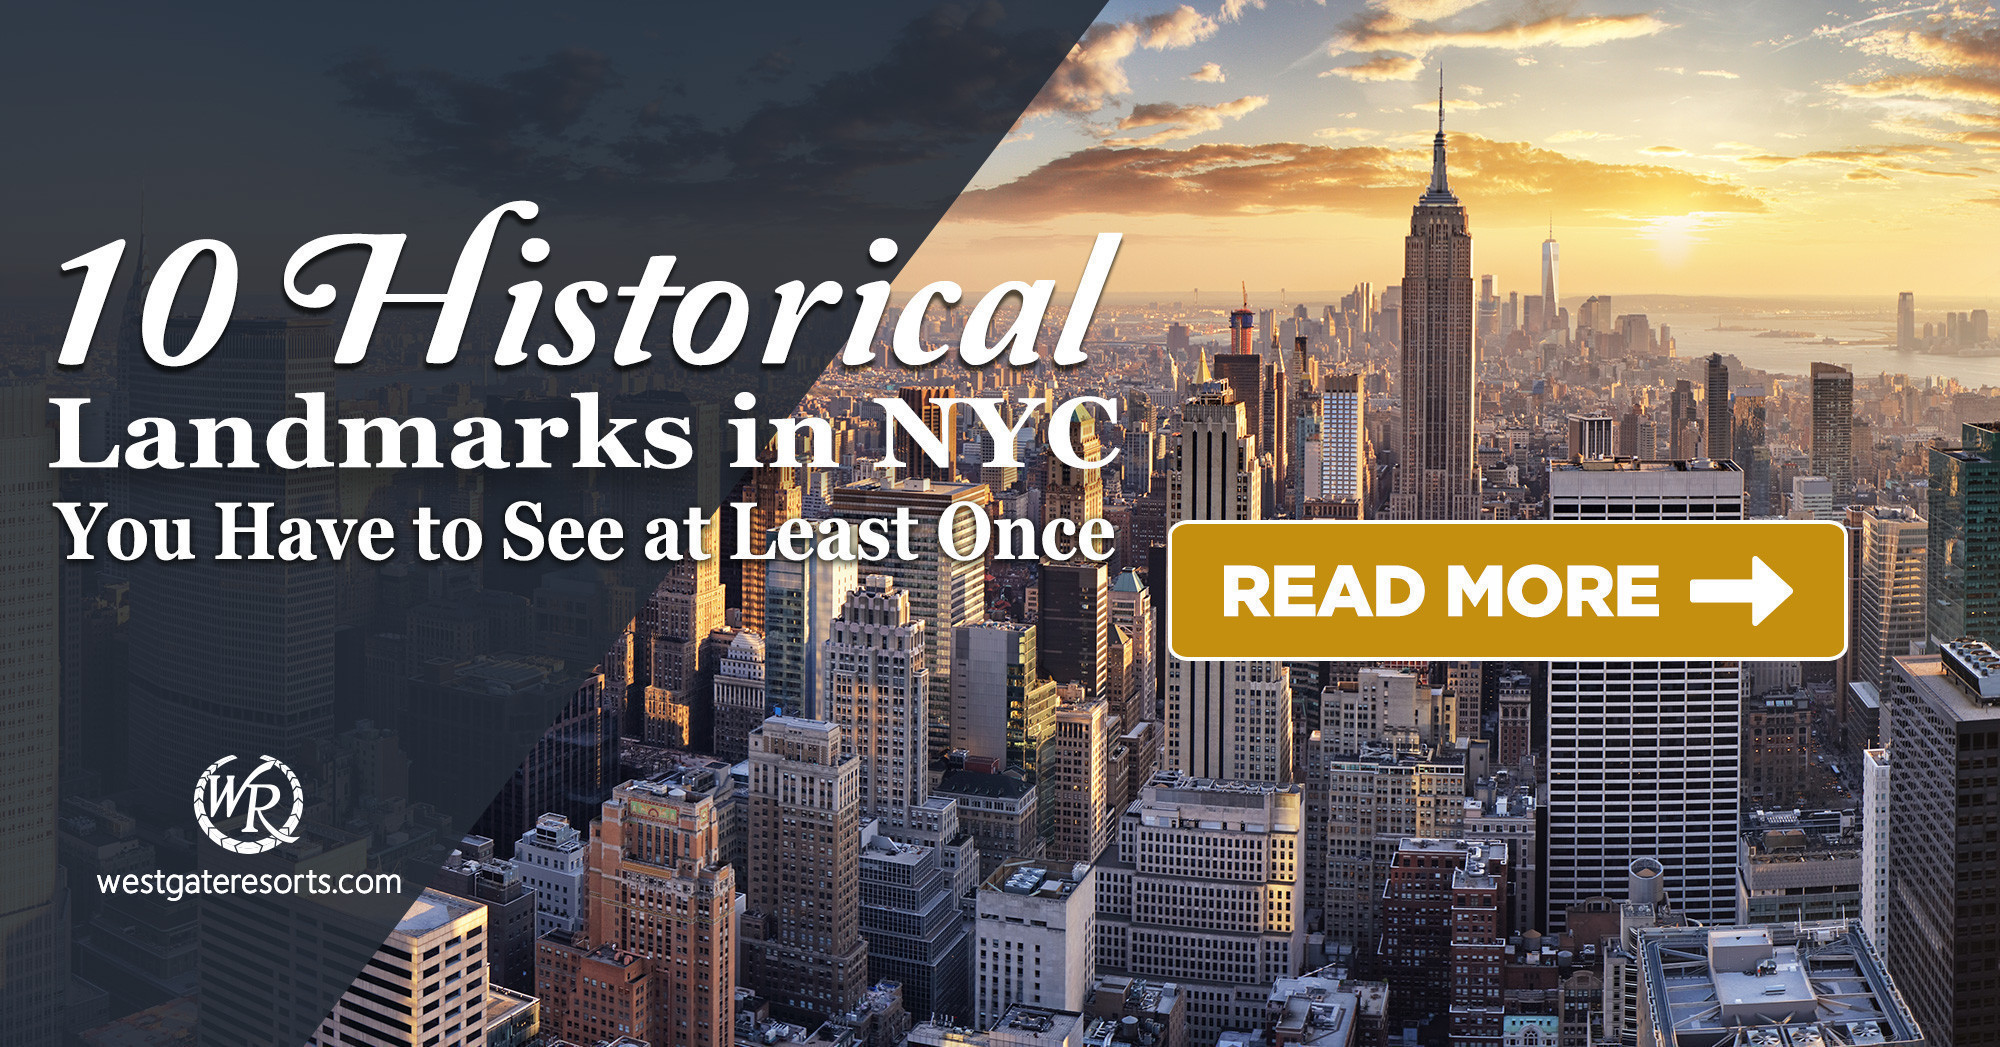 10 Historical Landmarks in NYC You Have to See